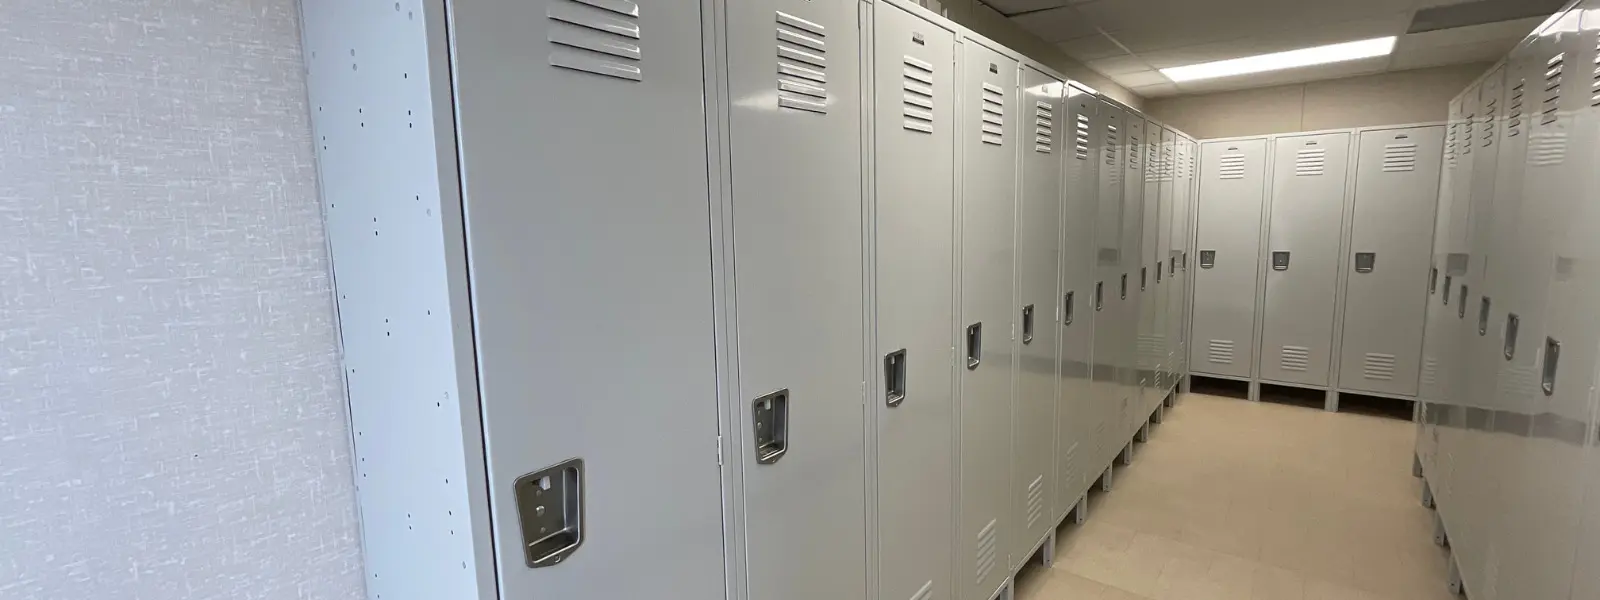 Locker and shower trailers for business and school facilities